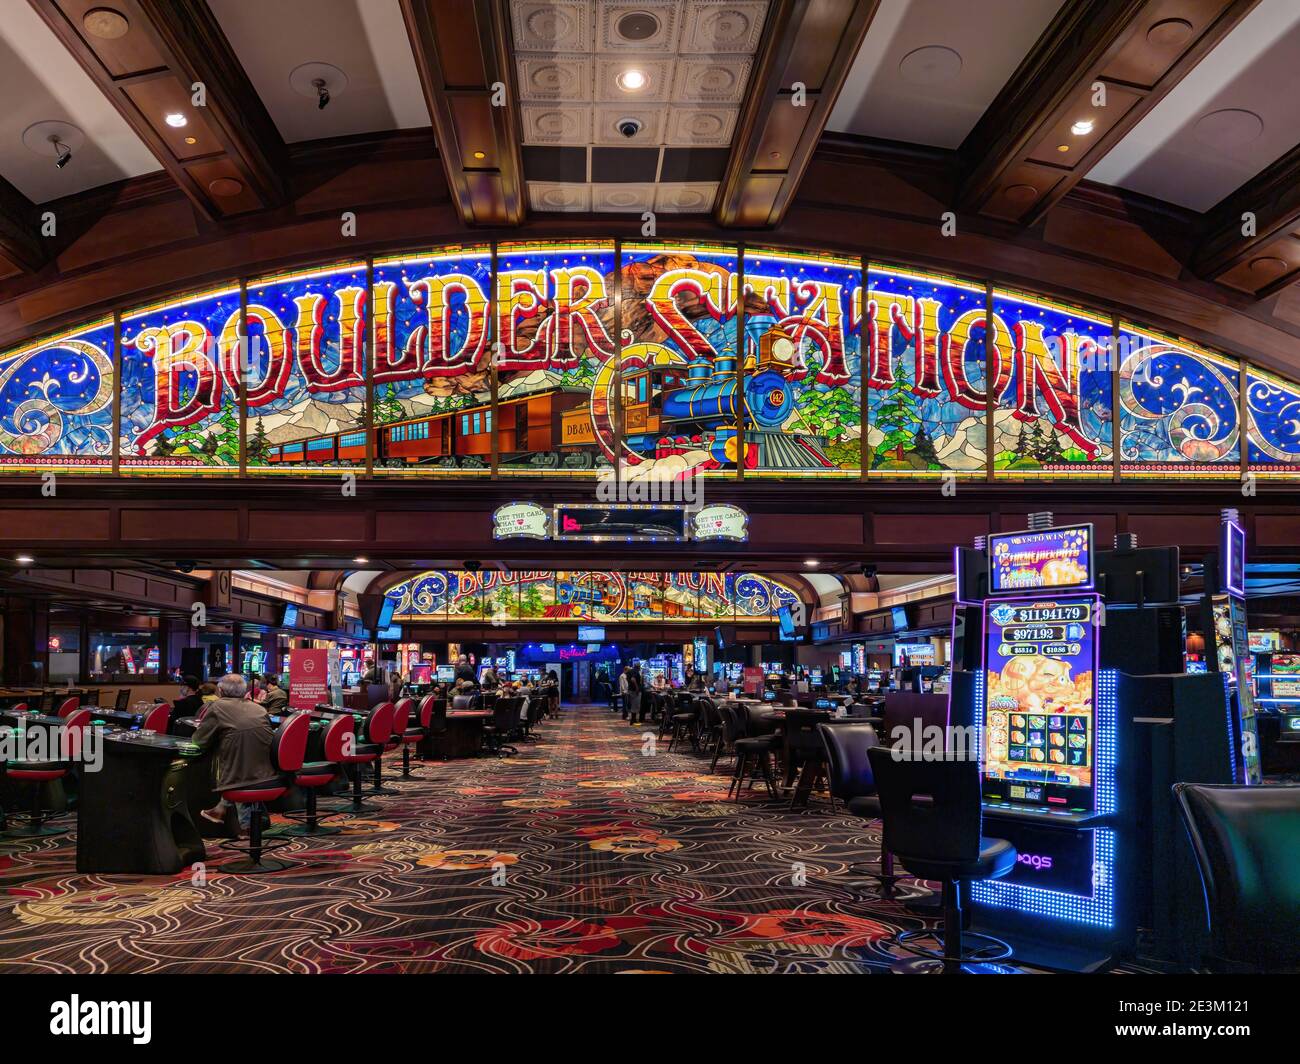 Las Vegas, JAN 14, 2021 - Interior view of the Boulder Station Hotel and  Casino Stock Photo - Alamy